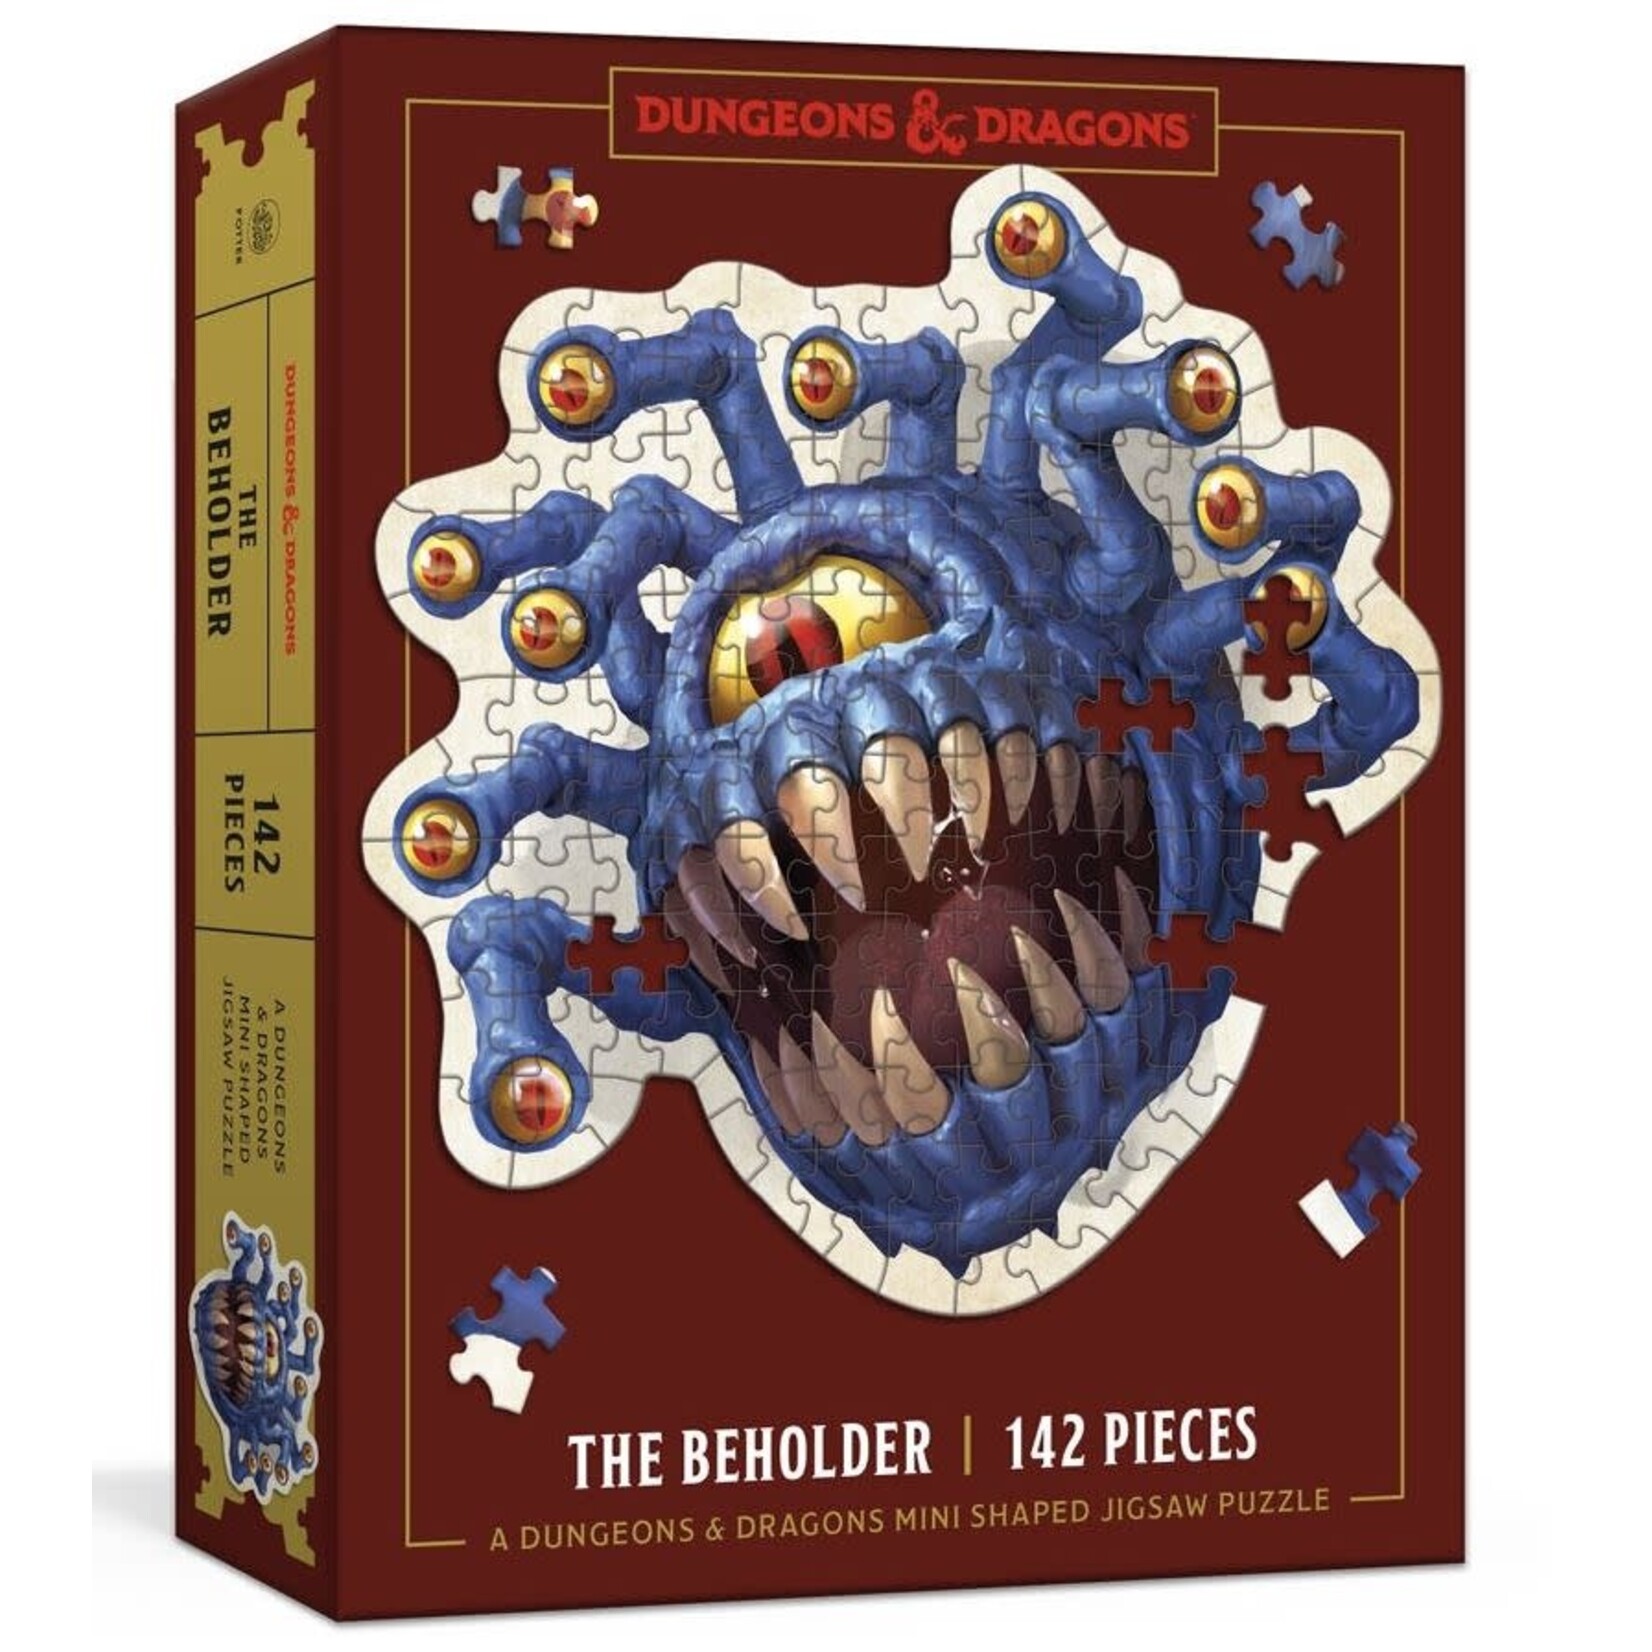 D&D Mini Shaped Jigsaw Puzzles: The Beholder Edition Dungeons & Dragons